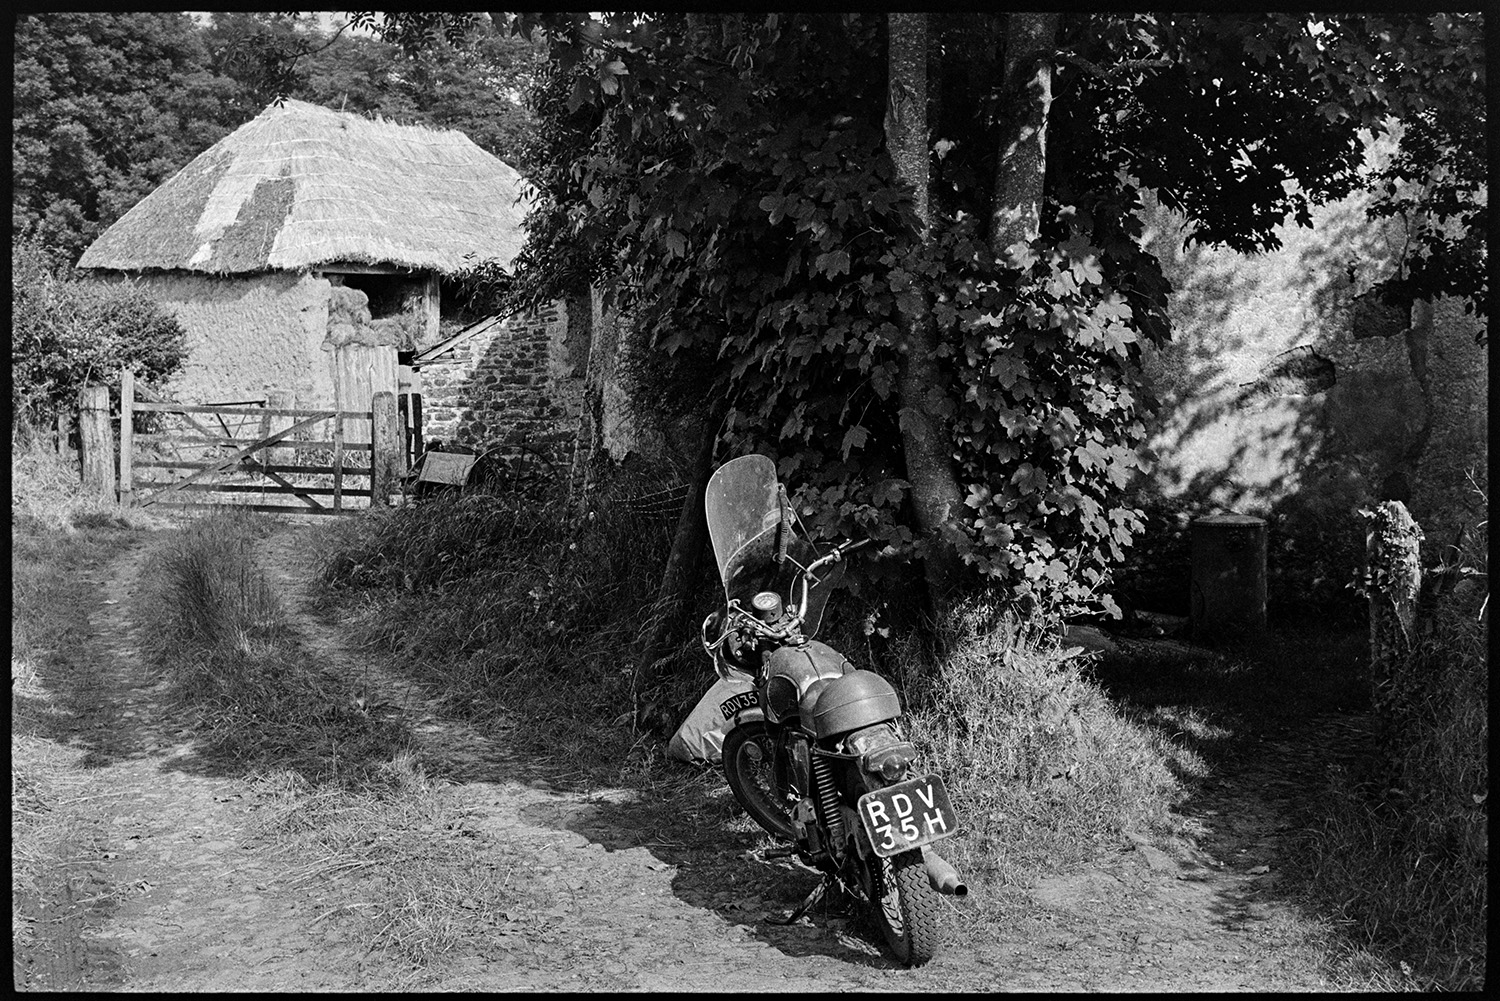 Thatcher's motorbike in front of barn. 
[Bill Hammond's motorcycle parked in a lane at Newhouse, Ashreigney. A thatched barn can be seen in the background behind a wooden field gate.]